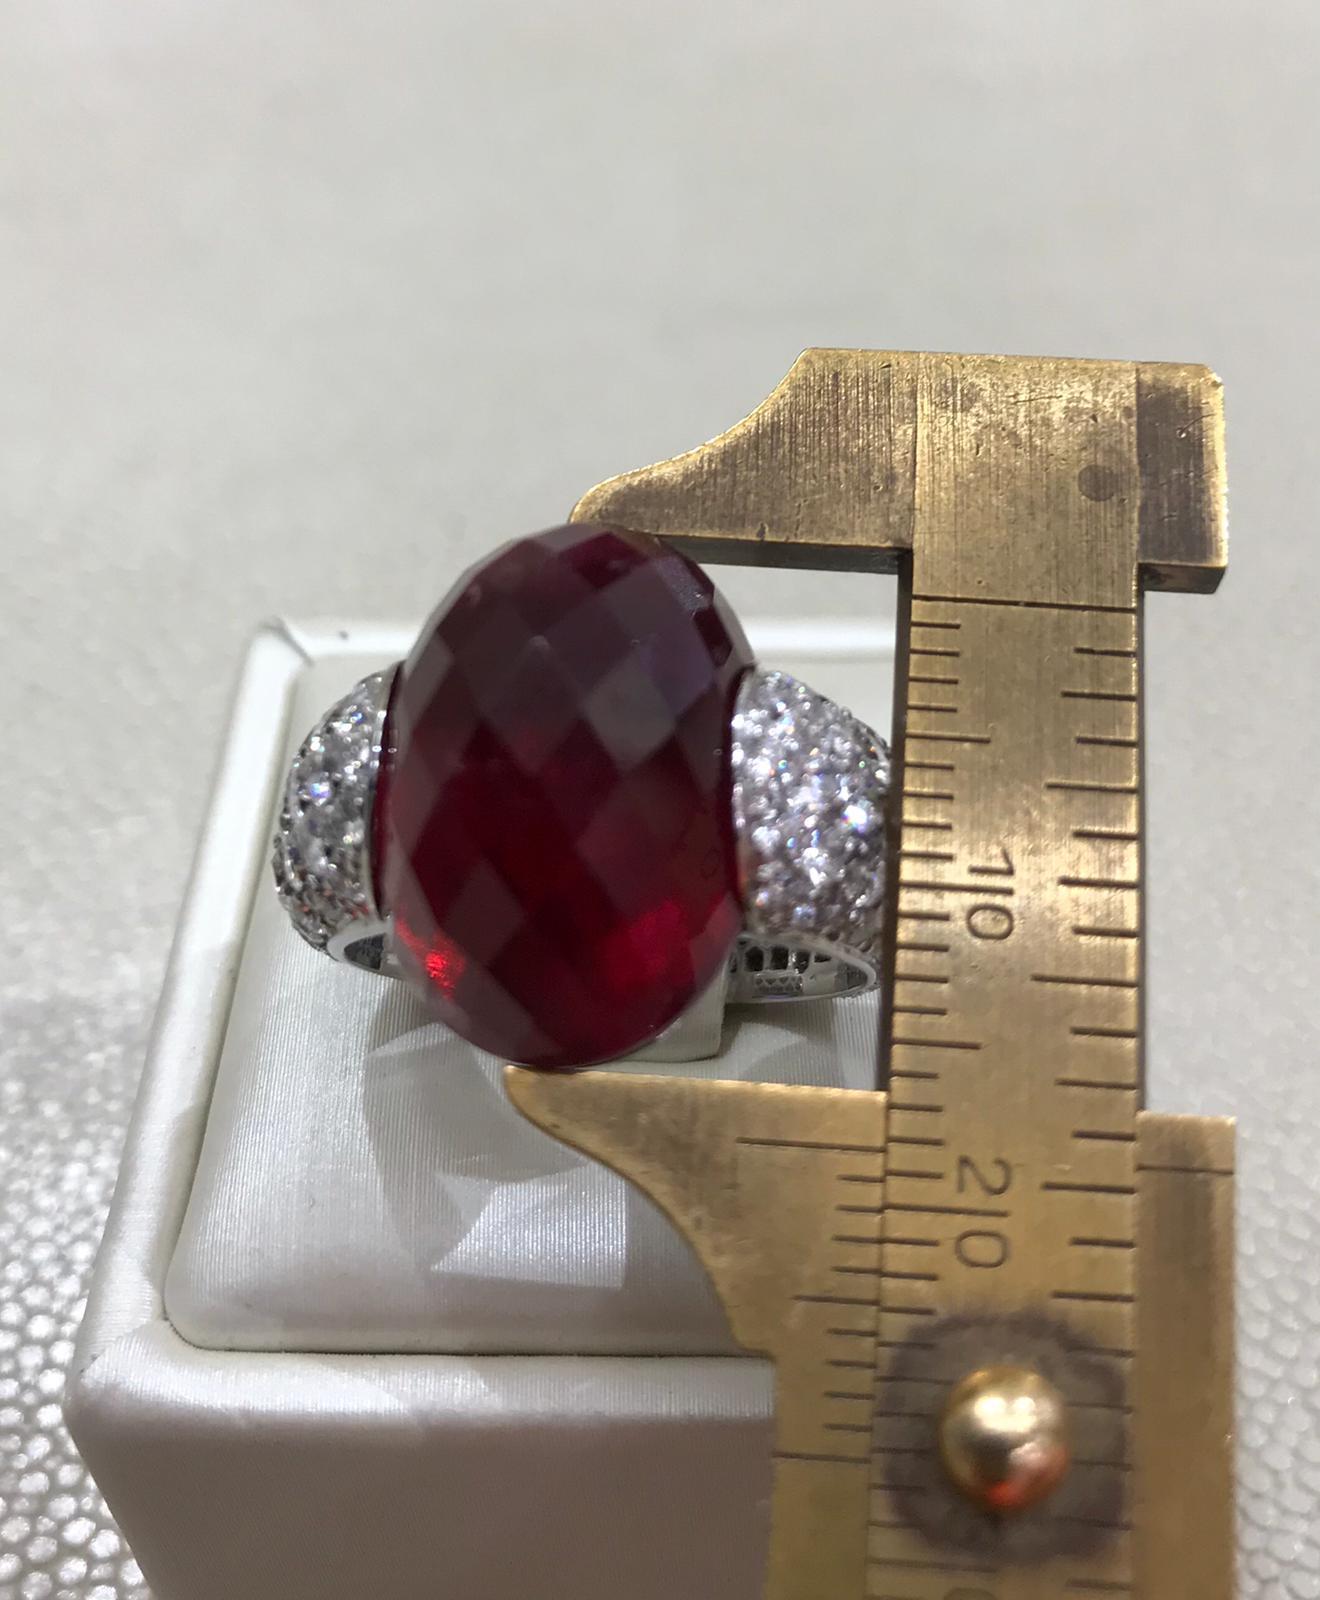 Briolette Cut Embrace White Gold Ring with Rubellite Faceted and Diamonds Full Pave For Sale